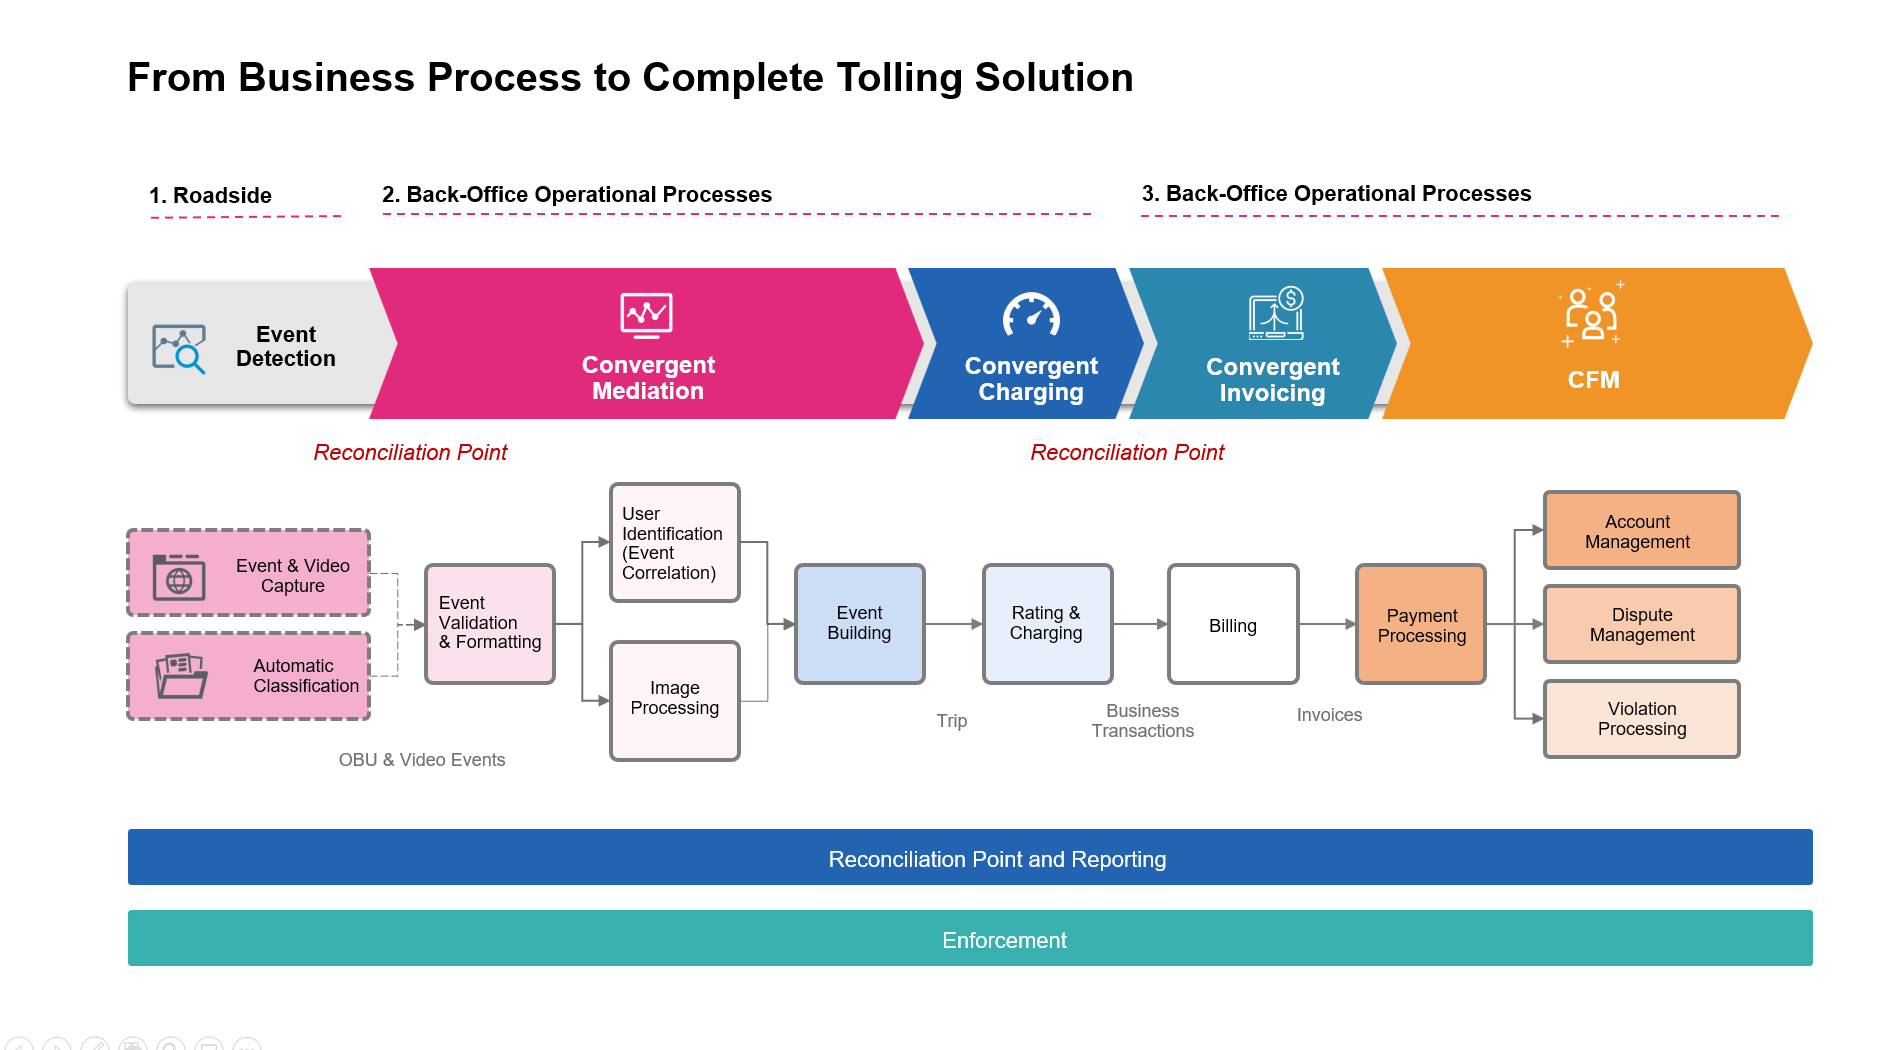 Complete Tolling Solution Architecture 